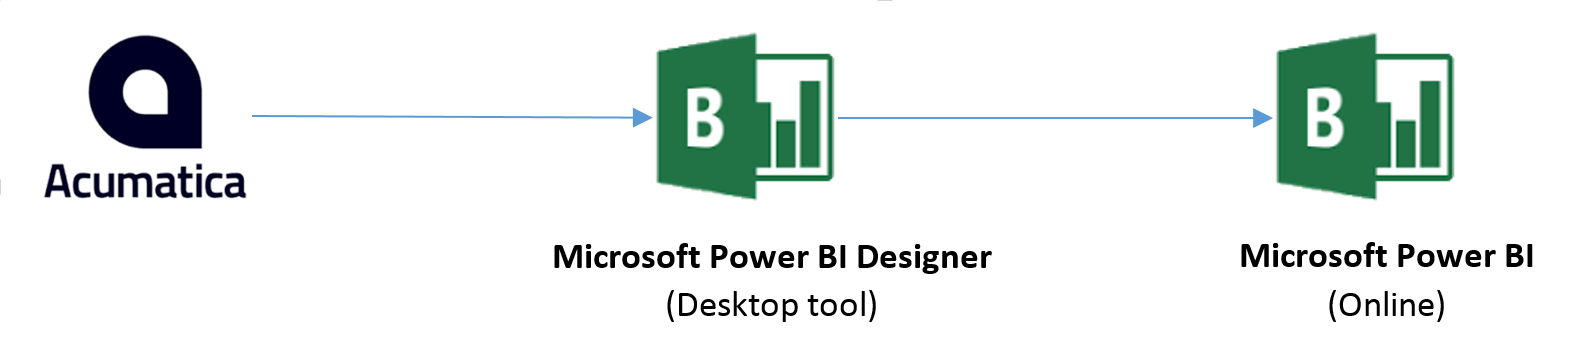 The Power BI Designer can consume OData formatted data with the JSON notation